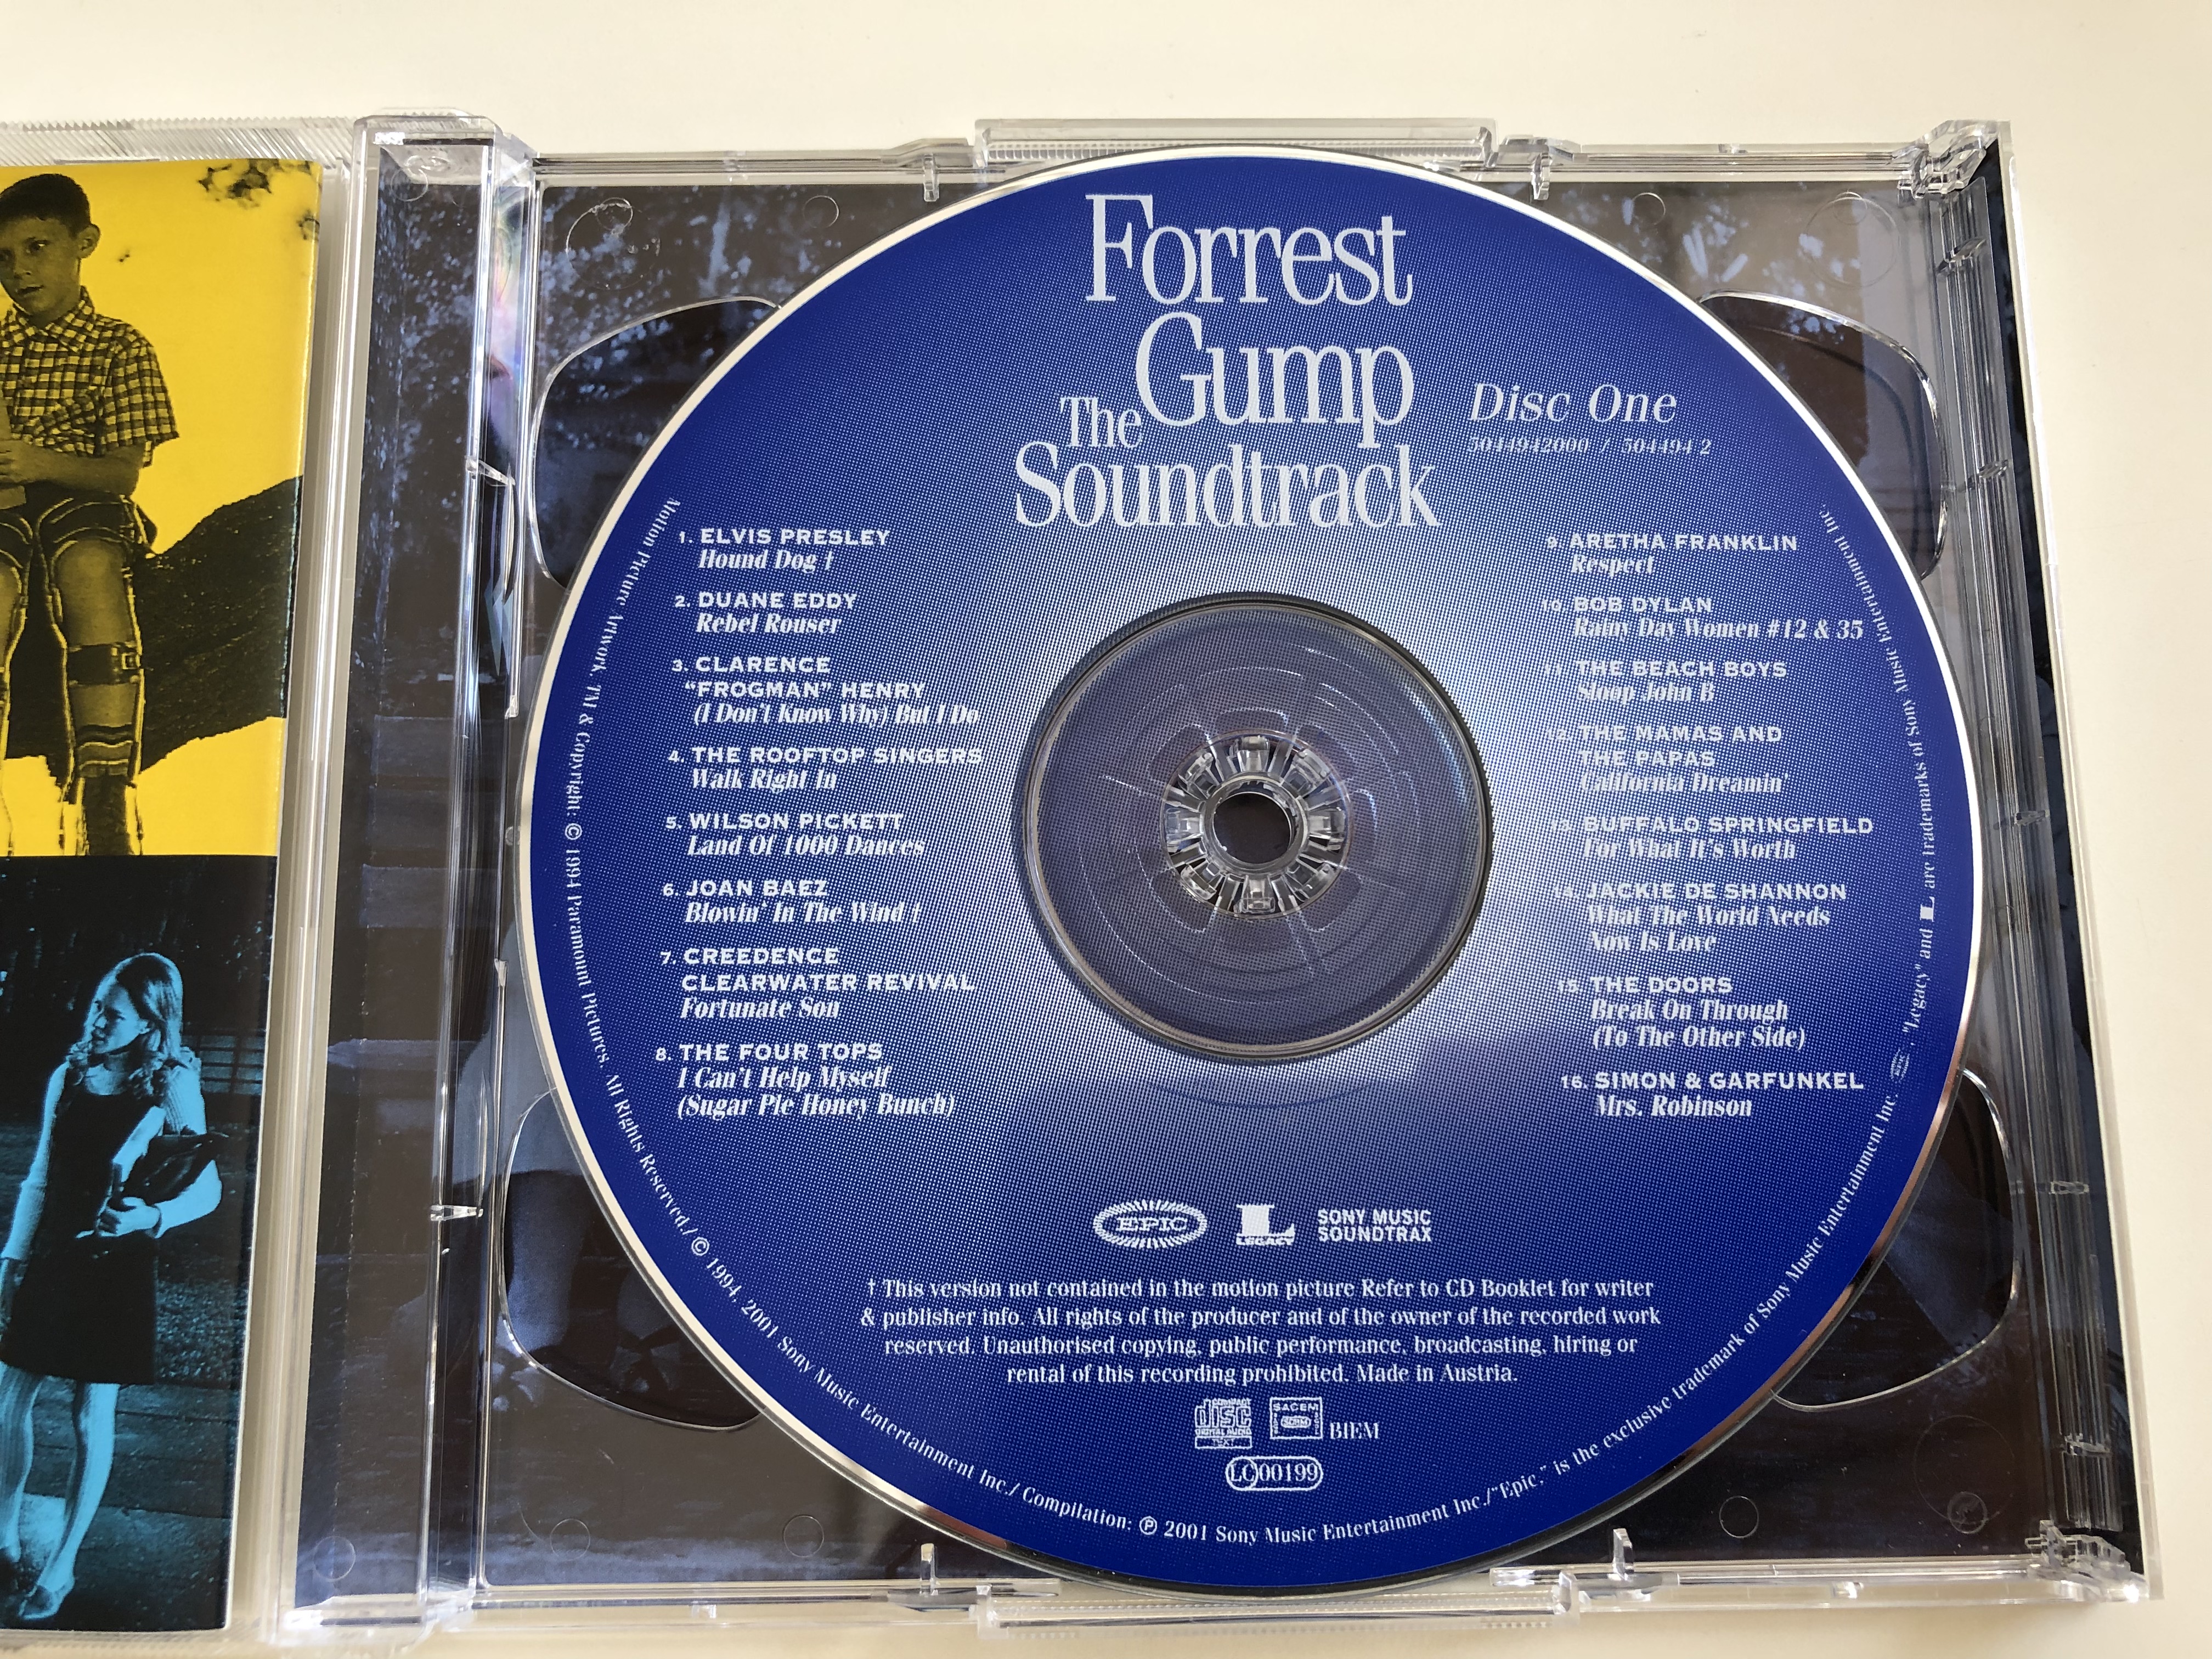 forrest-gump-the-soundtrack-34-american-classics-on-2-cds-special-collector-s-edition-epic-epc-5044942-audio-cd-set-1994-3-.jpg